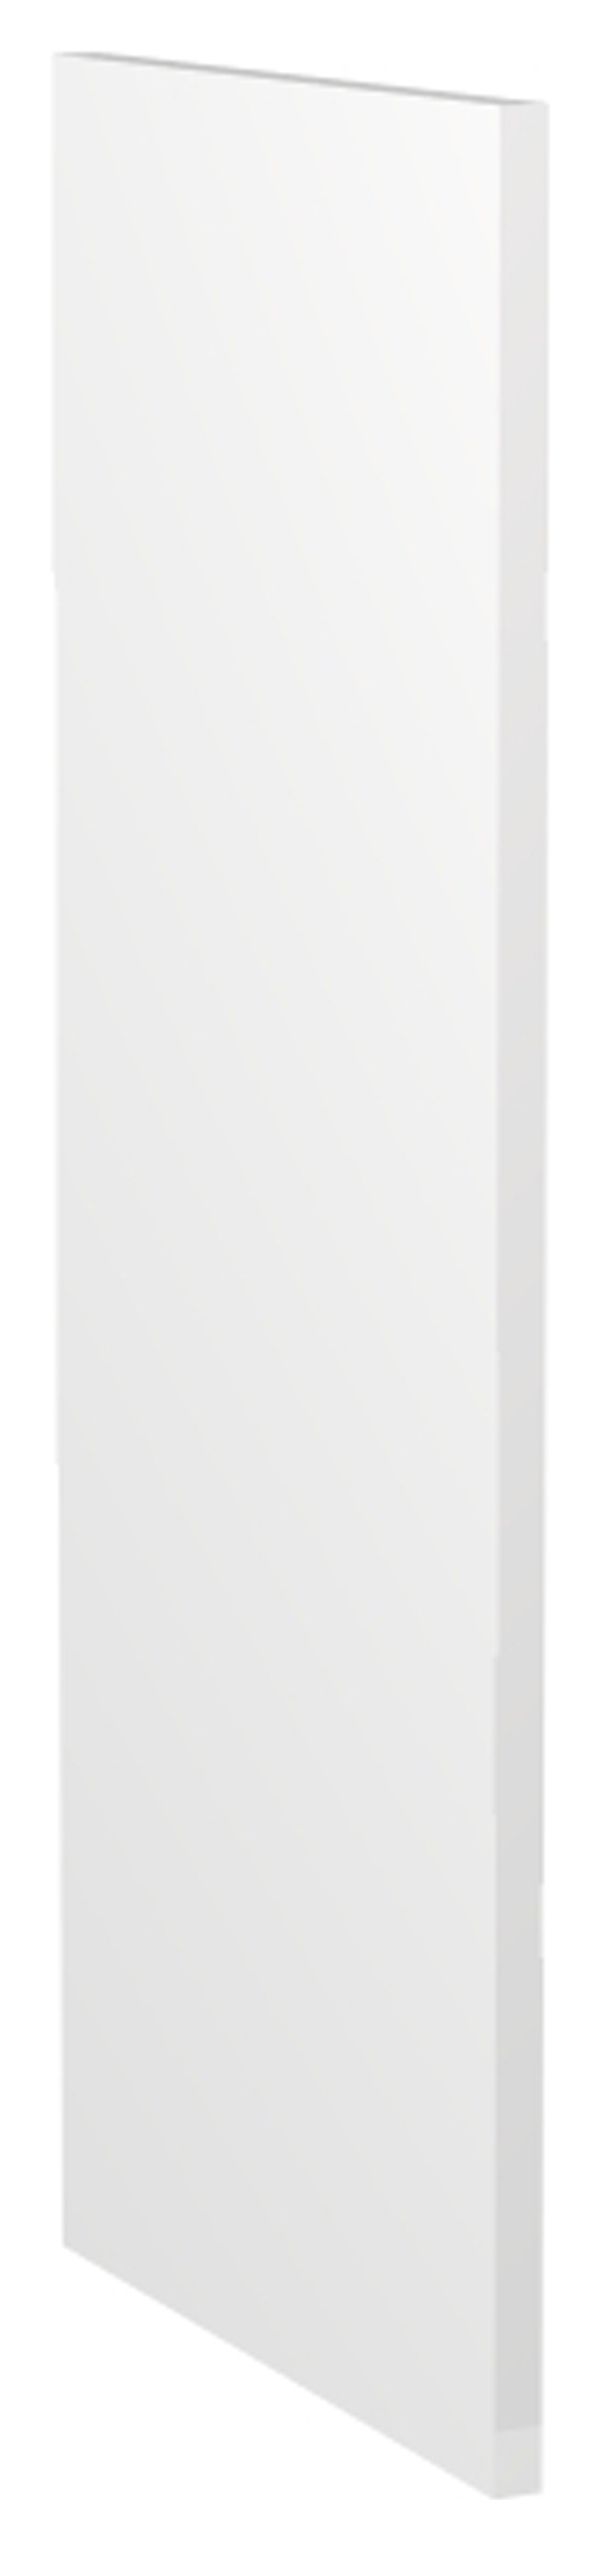 Wickes Vermont Gloss White Wall Decor End Panel - 18mm